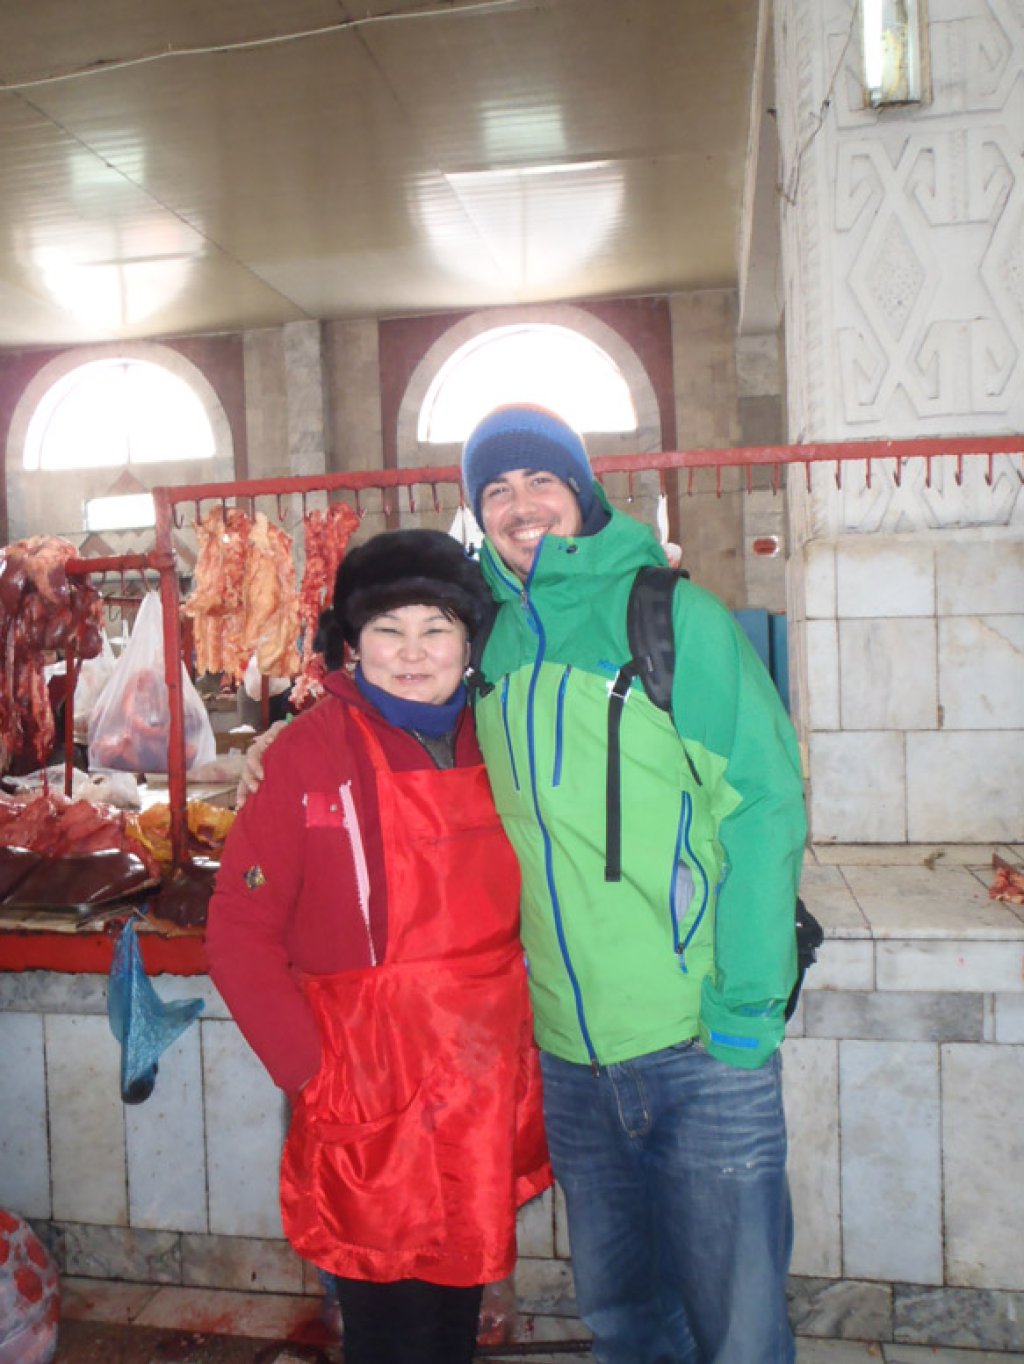 The butcher's wife at the market in Bishkek was very charming...